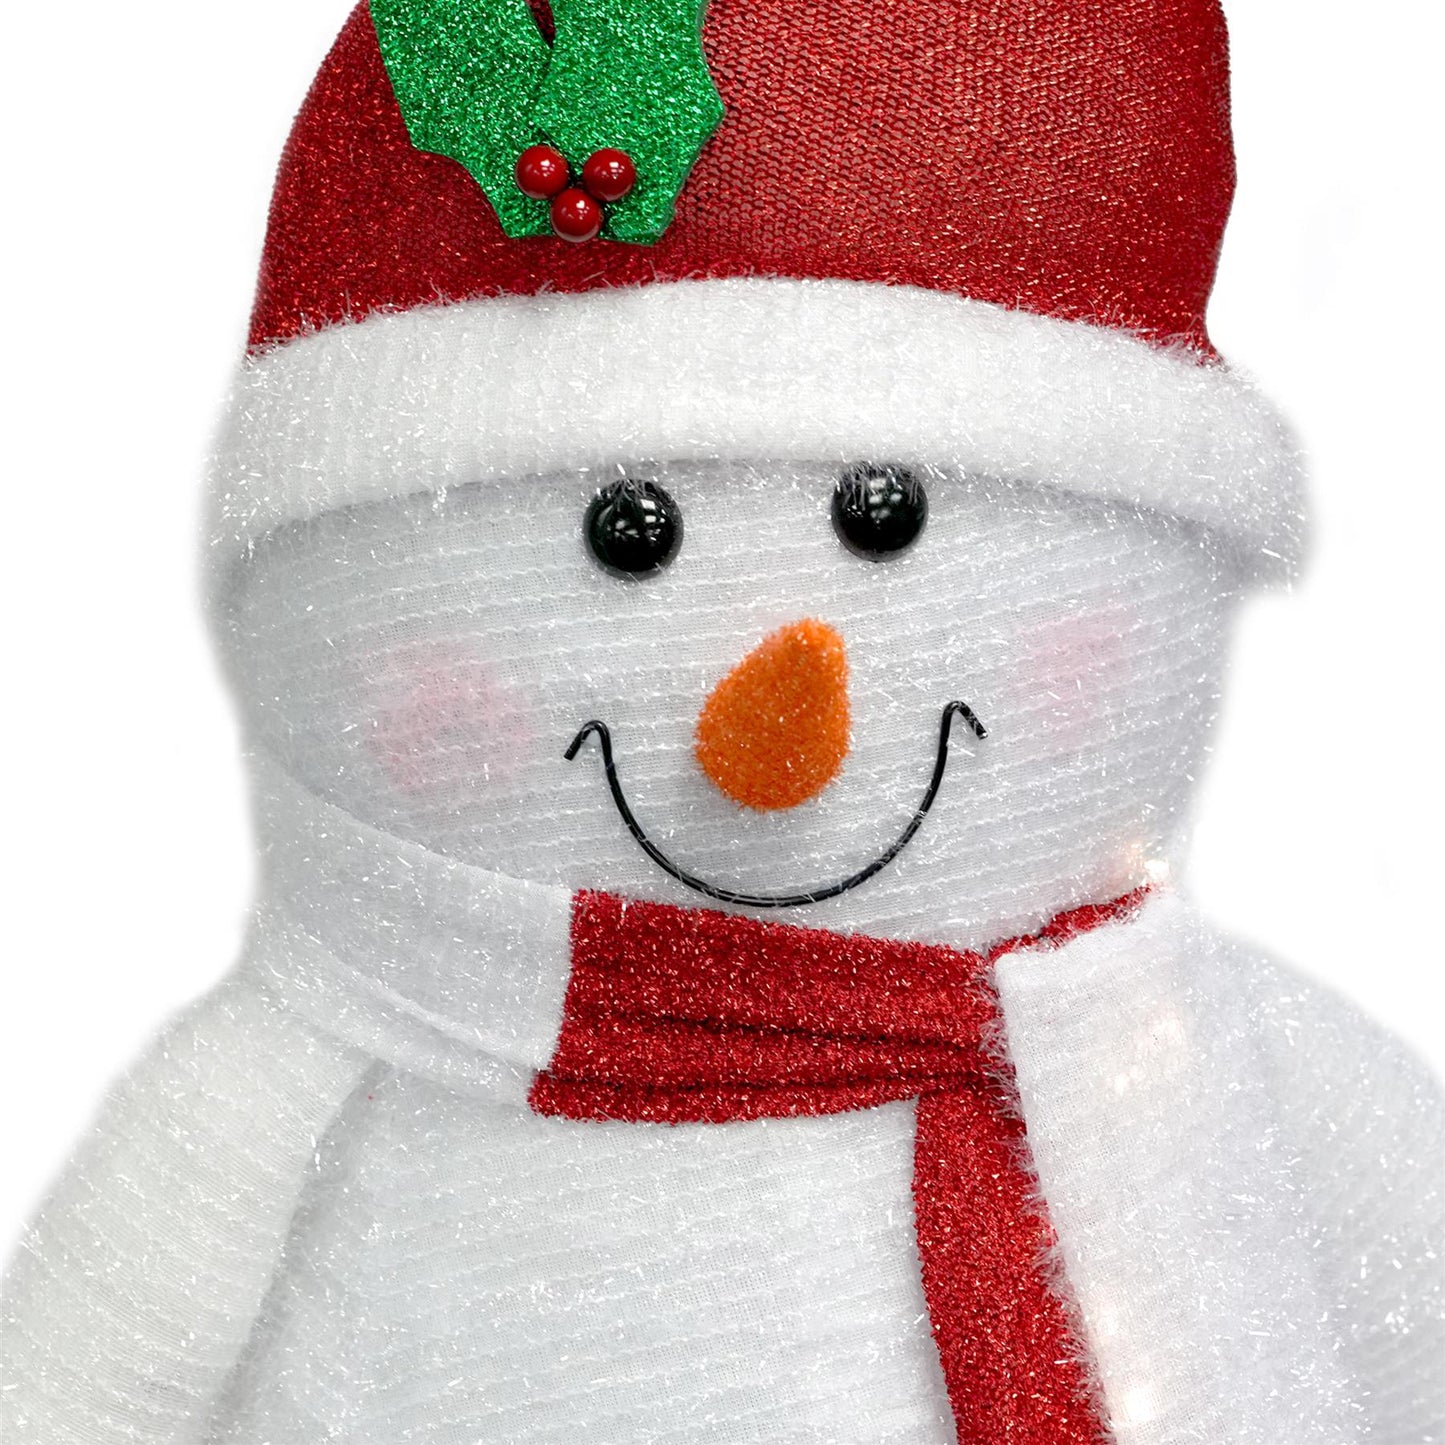 Collapsible Snowman Christmas Decoration with LED lights by The Magic Toy Shop - UKBuyZone